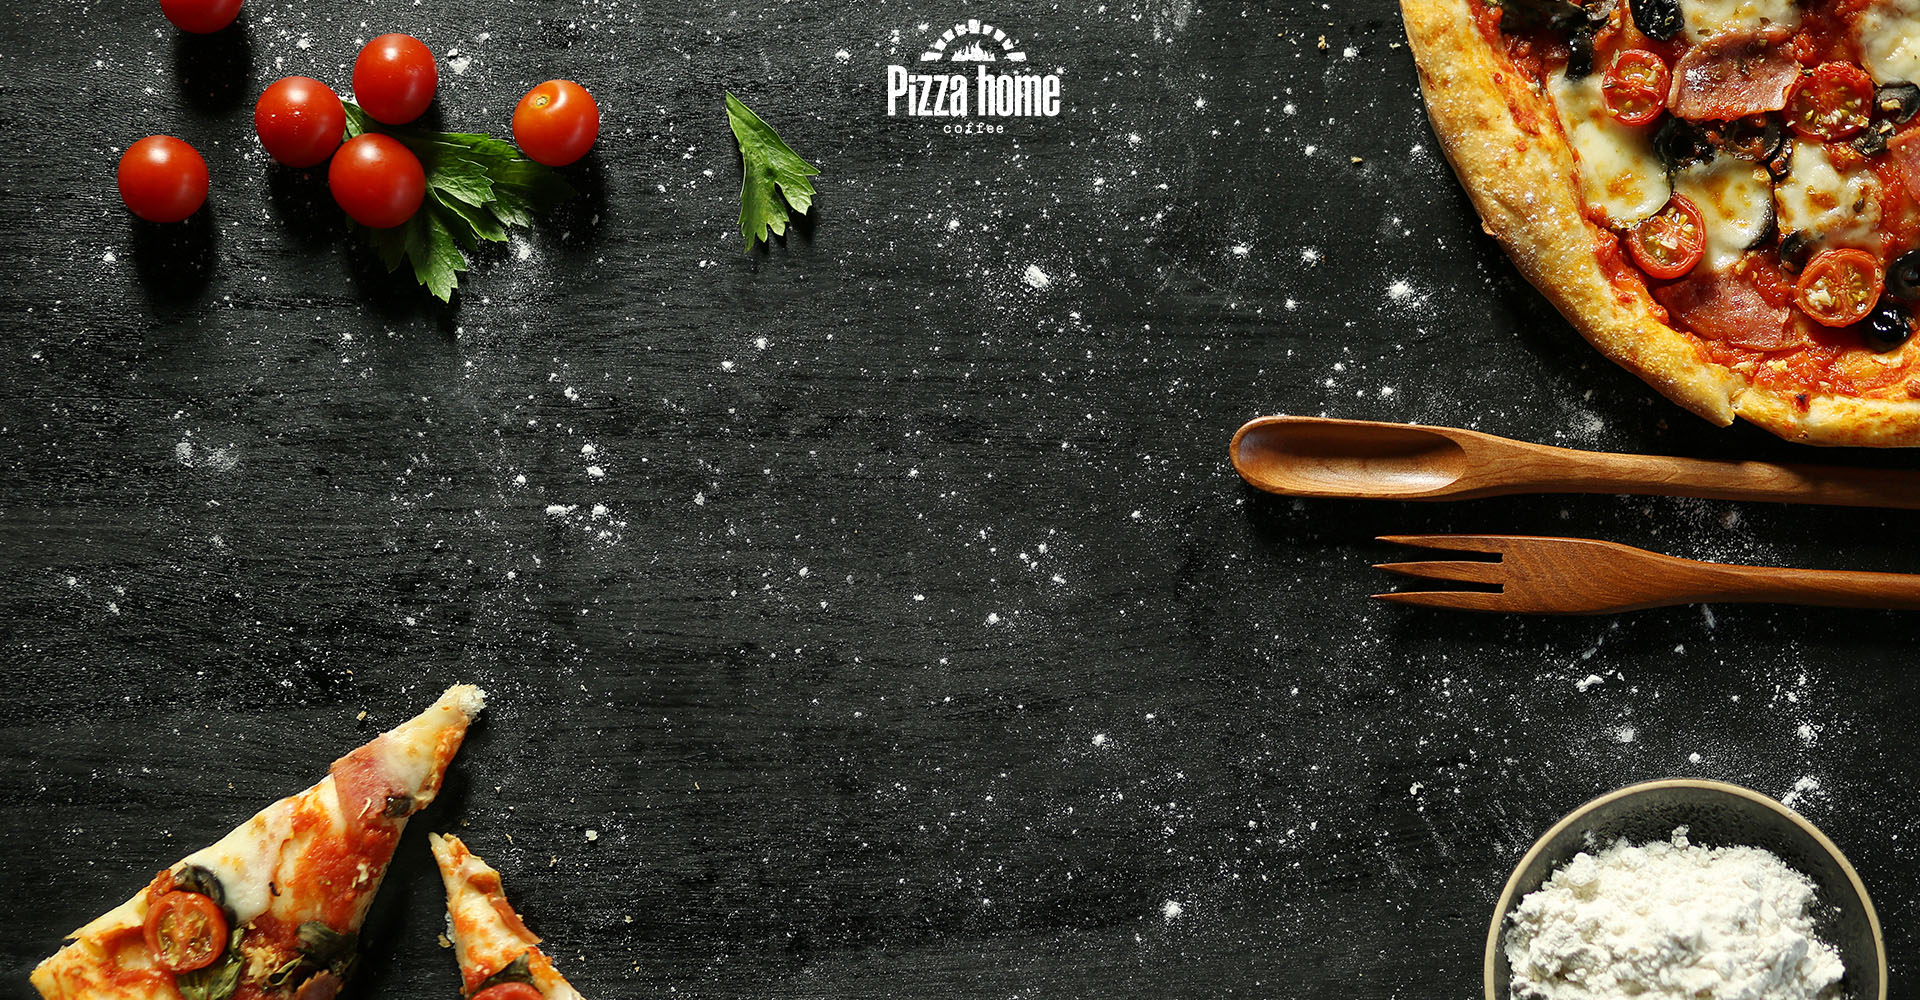 Pizza home